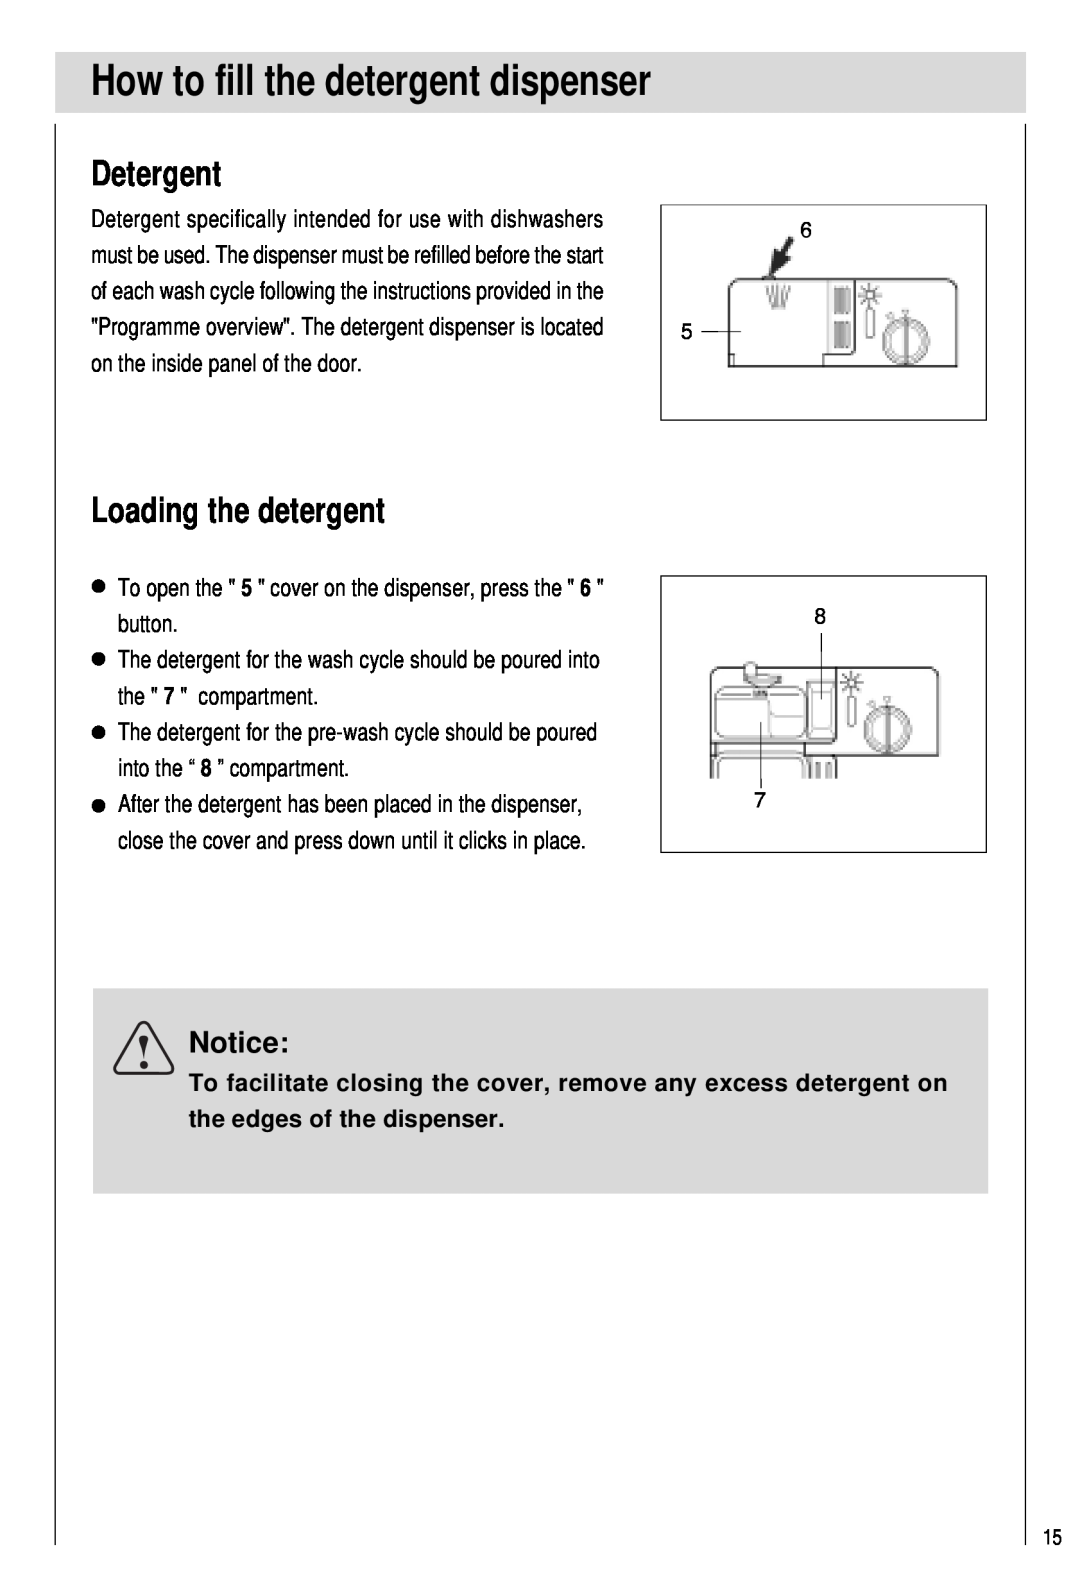 Haier DW15-PFE1, DW15-PFE2 manual How to fill the detergent dispenser, Detergent, Loading the detergent, Notice 